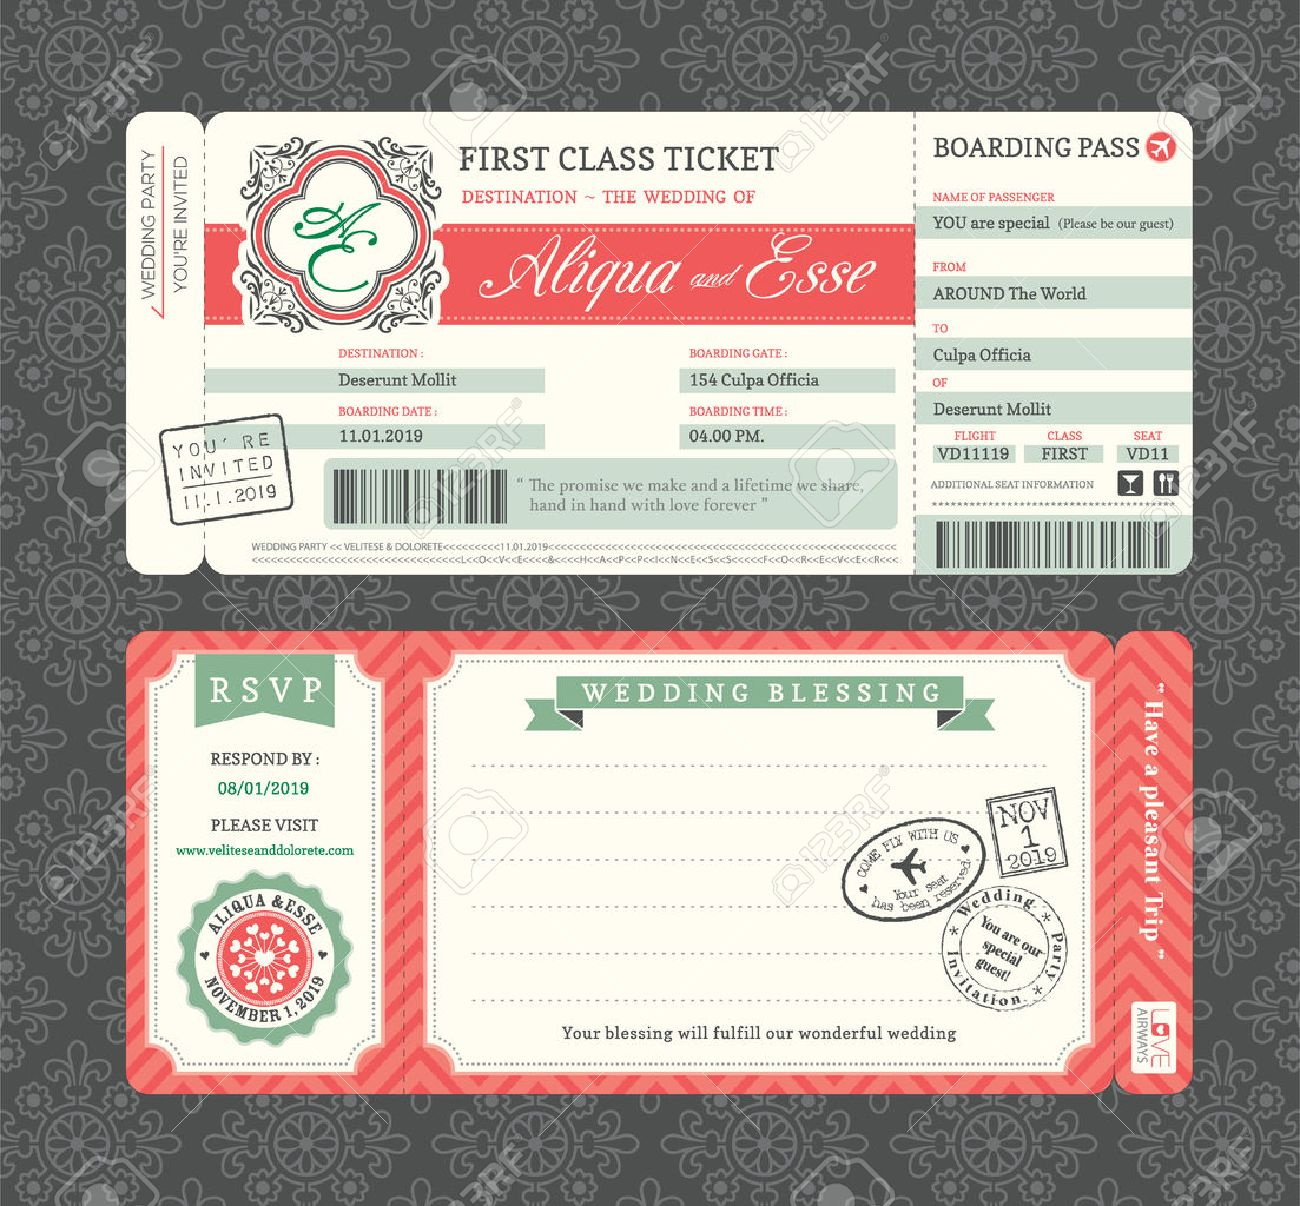 Vintage Boarding Pass Ticket Wedding Invitation Template Royalty pertaining to measurements 1300 X 1206